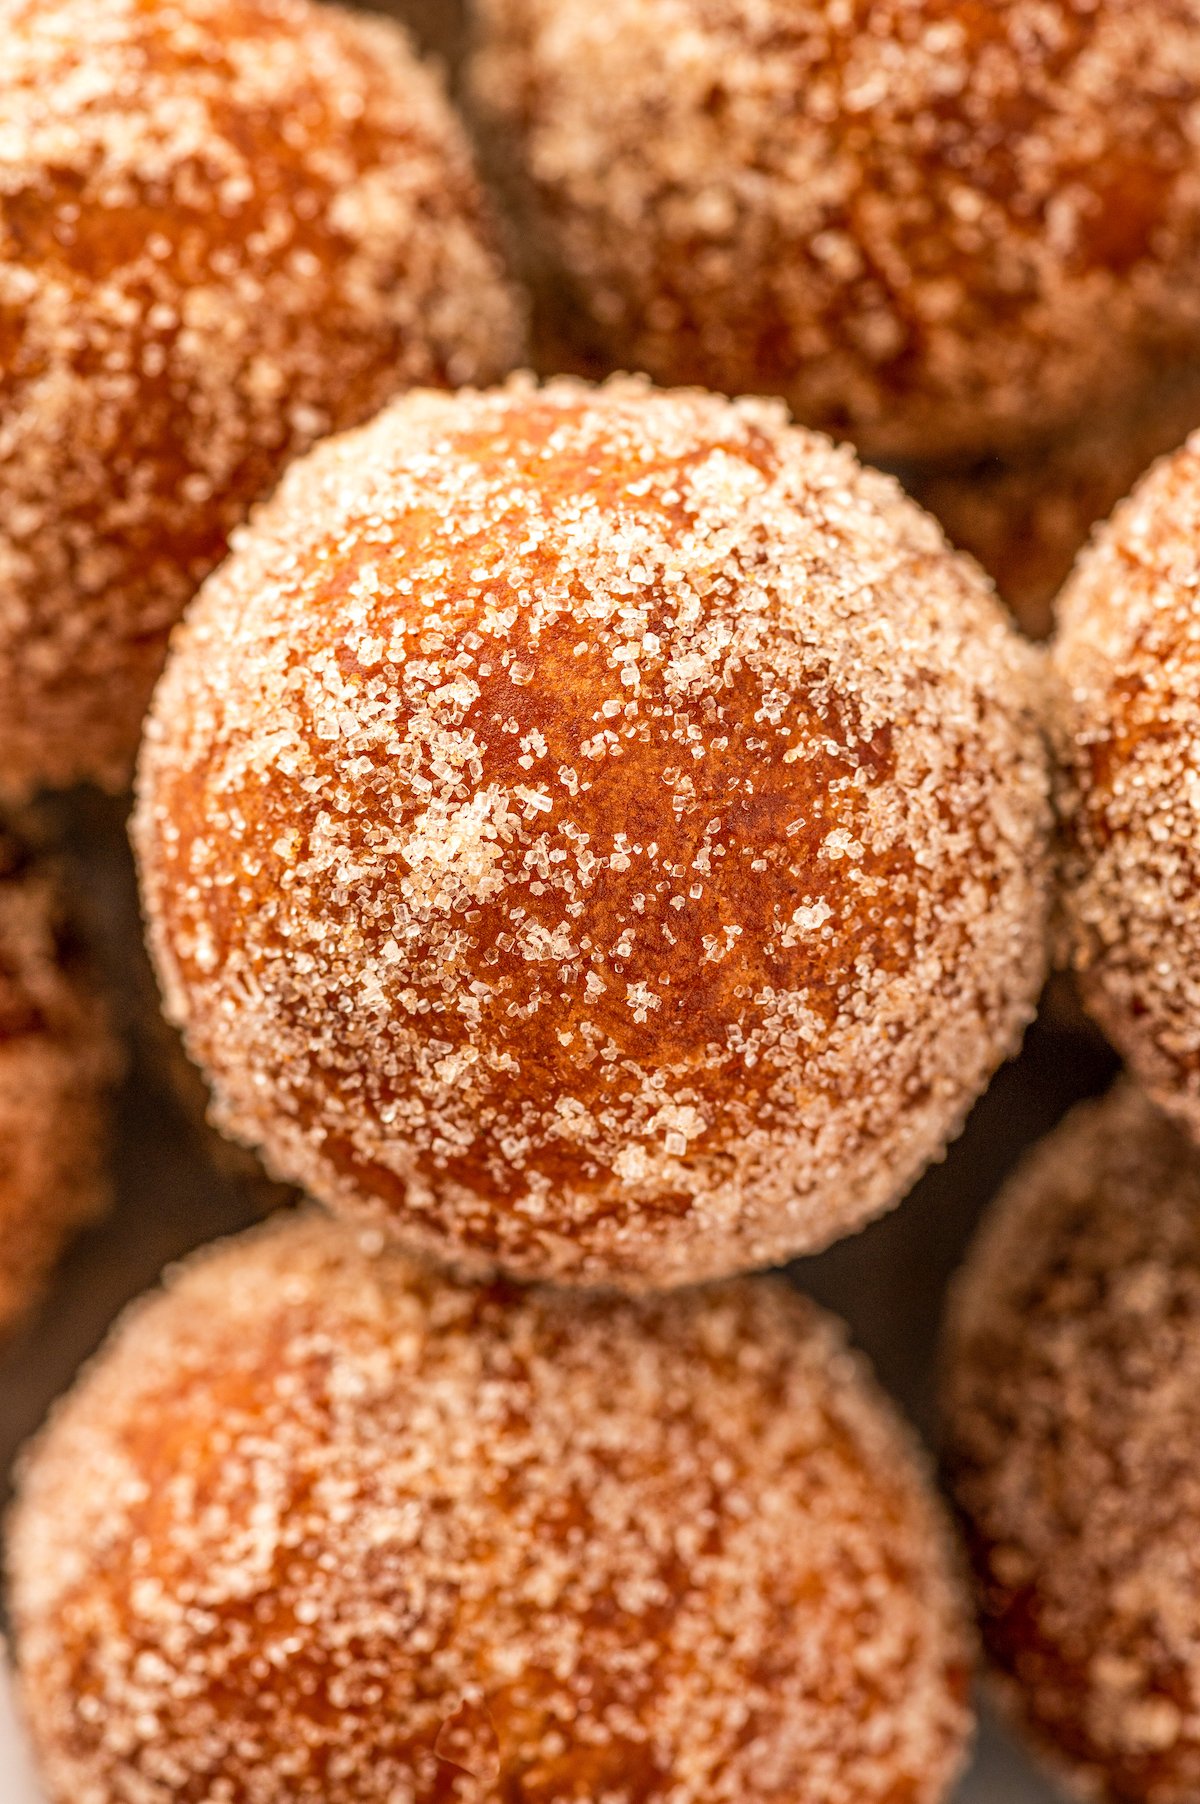 Close up shot of cinnamon sugar donut holes with glistening sugar on the outside.